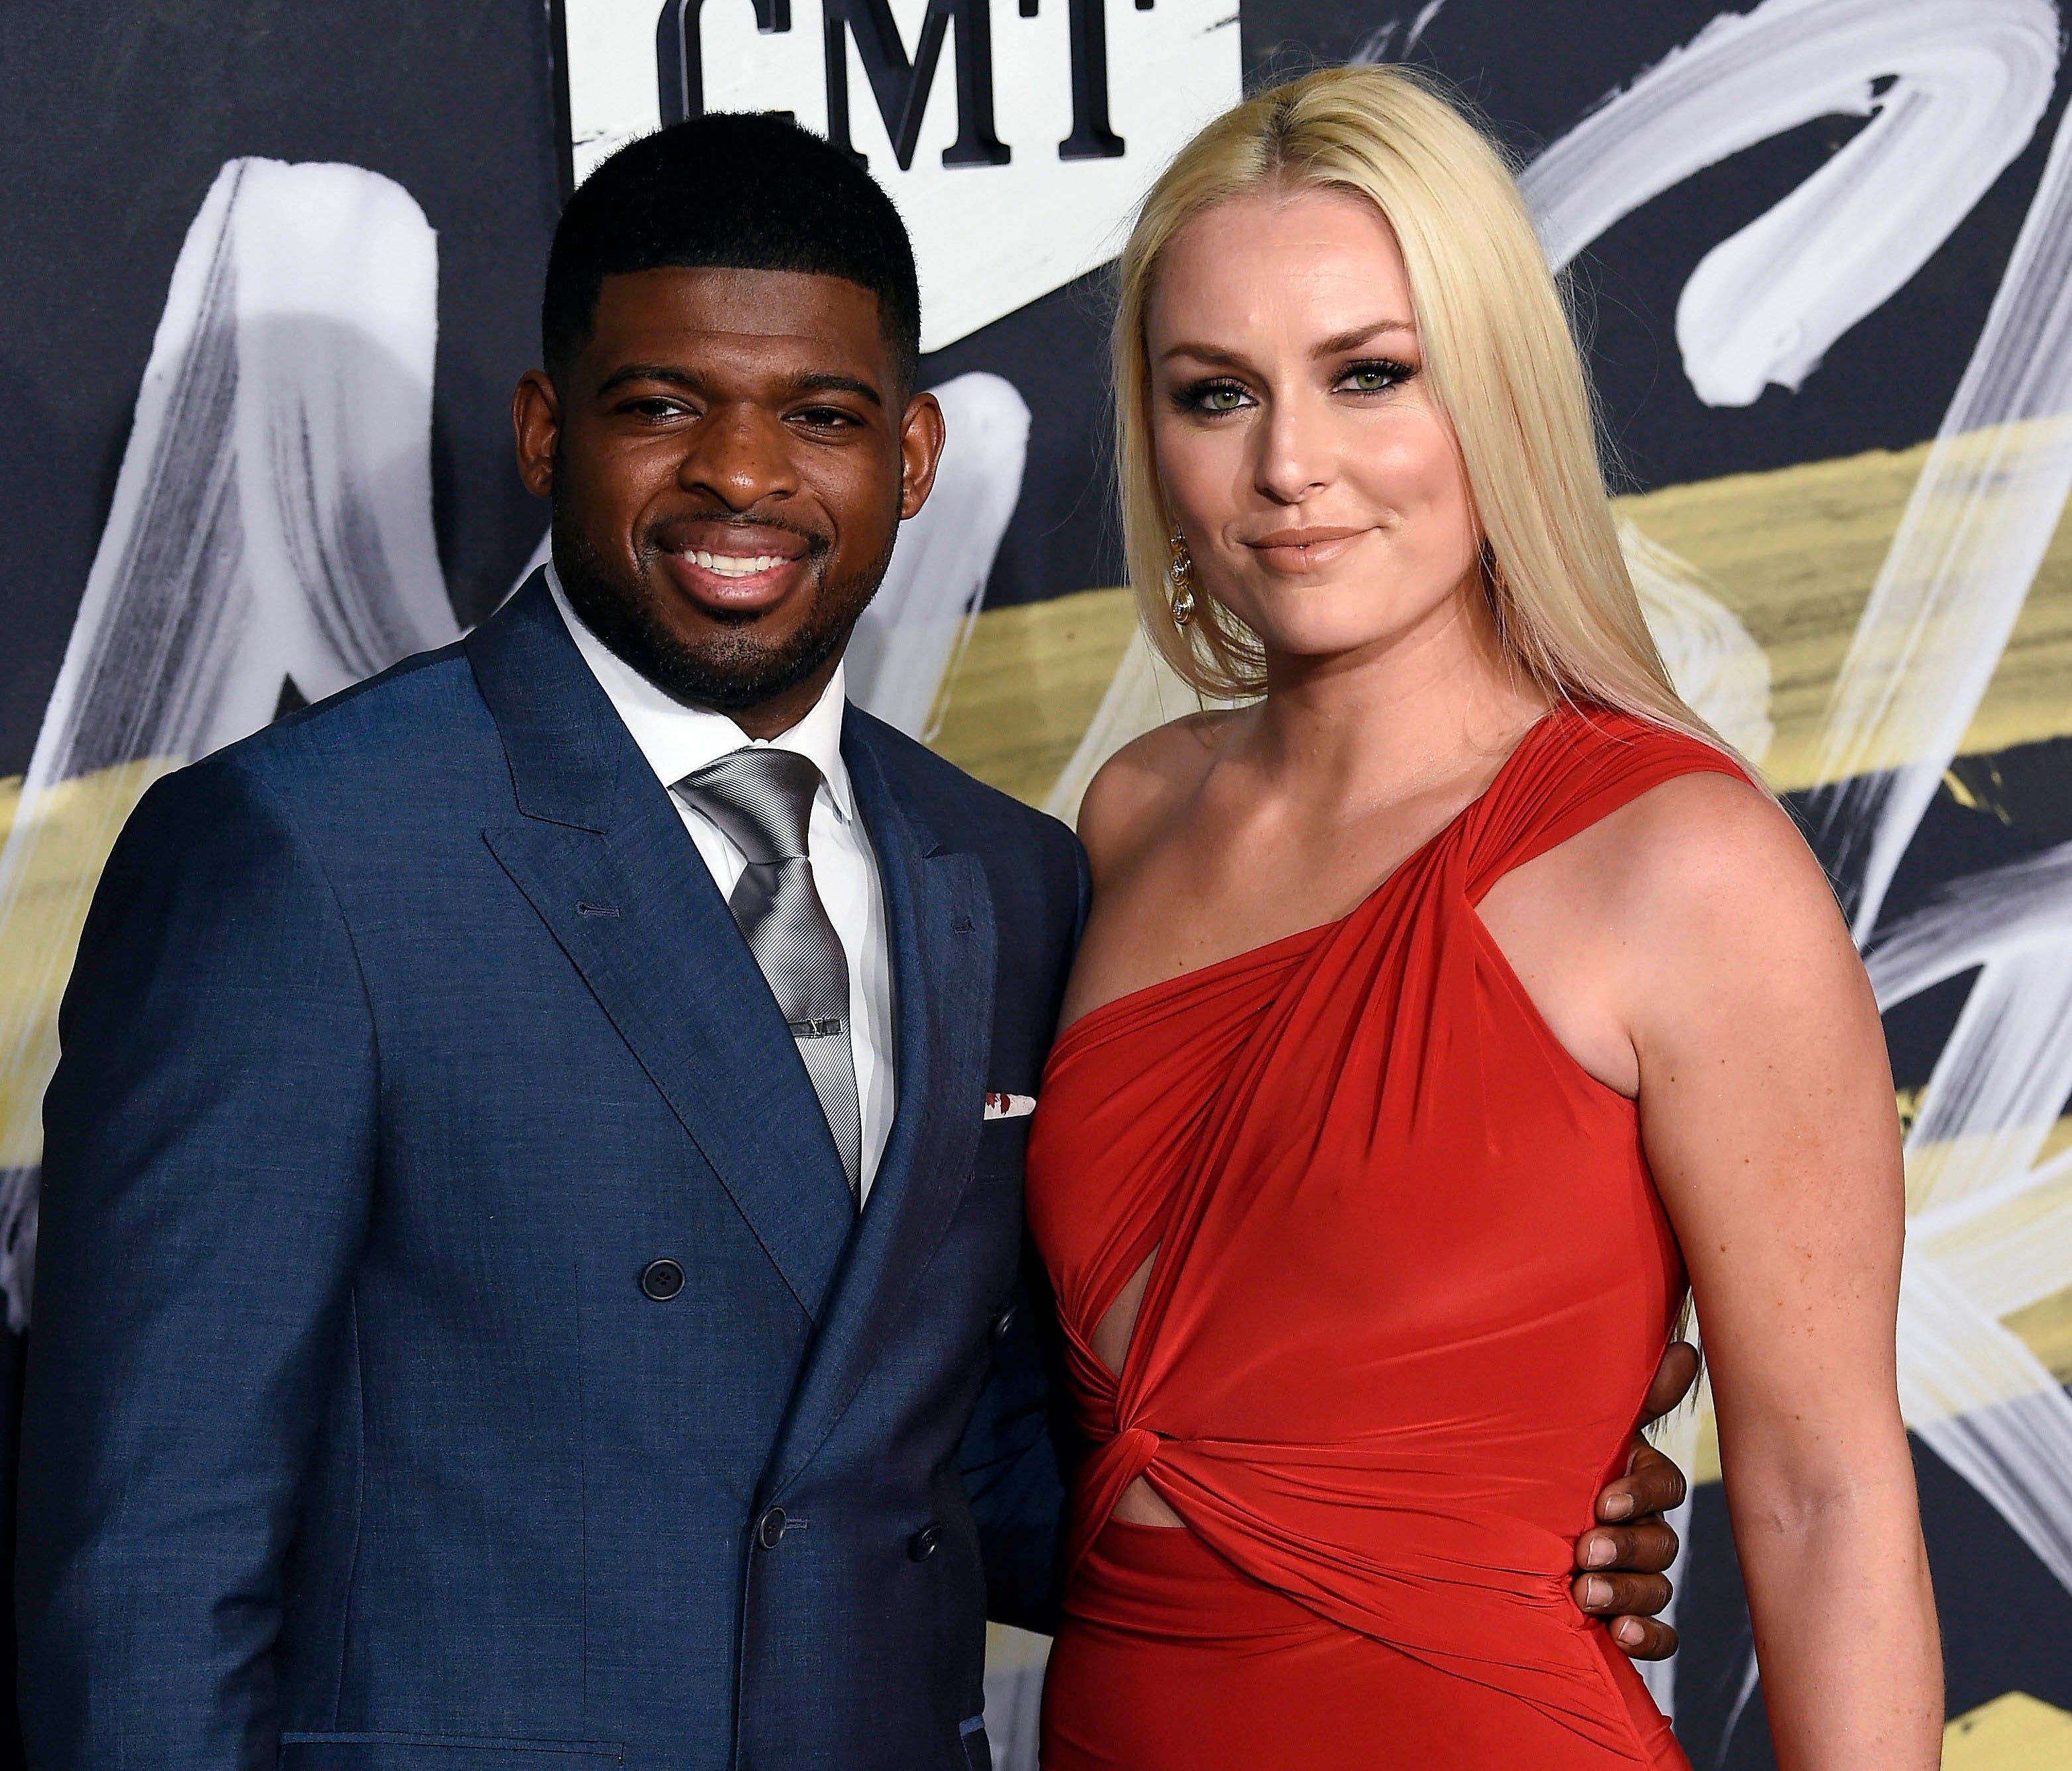 P. K. Subban and Lindsey Vonn on the red carpet prior to the CMT Music Awards at Bridgestone Arena.